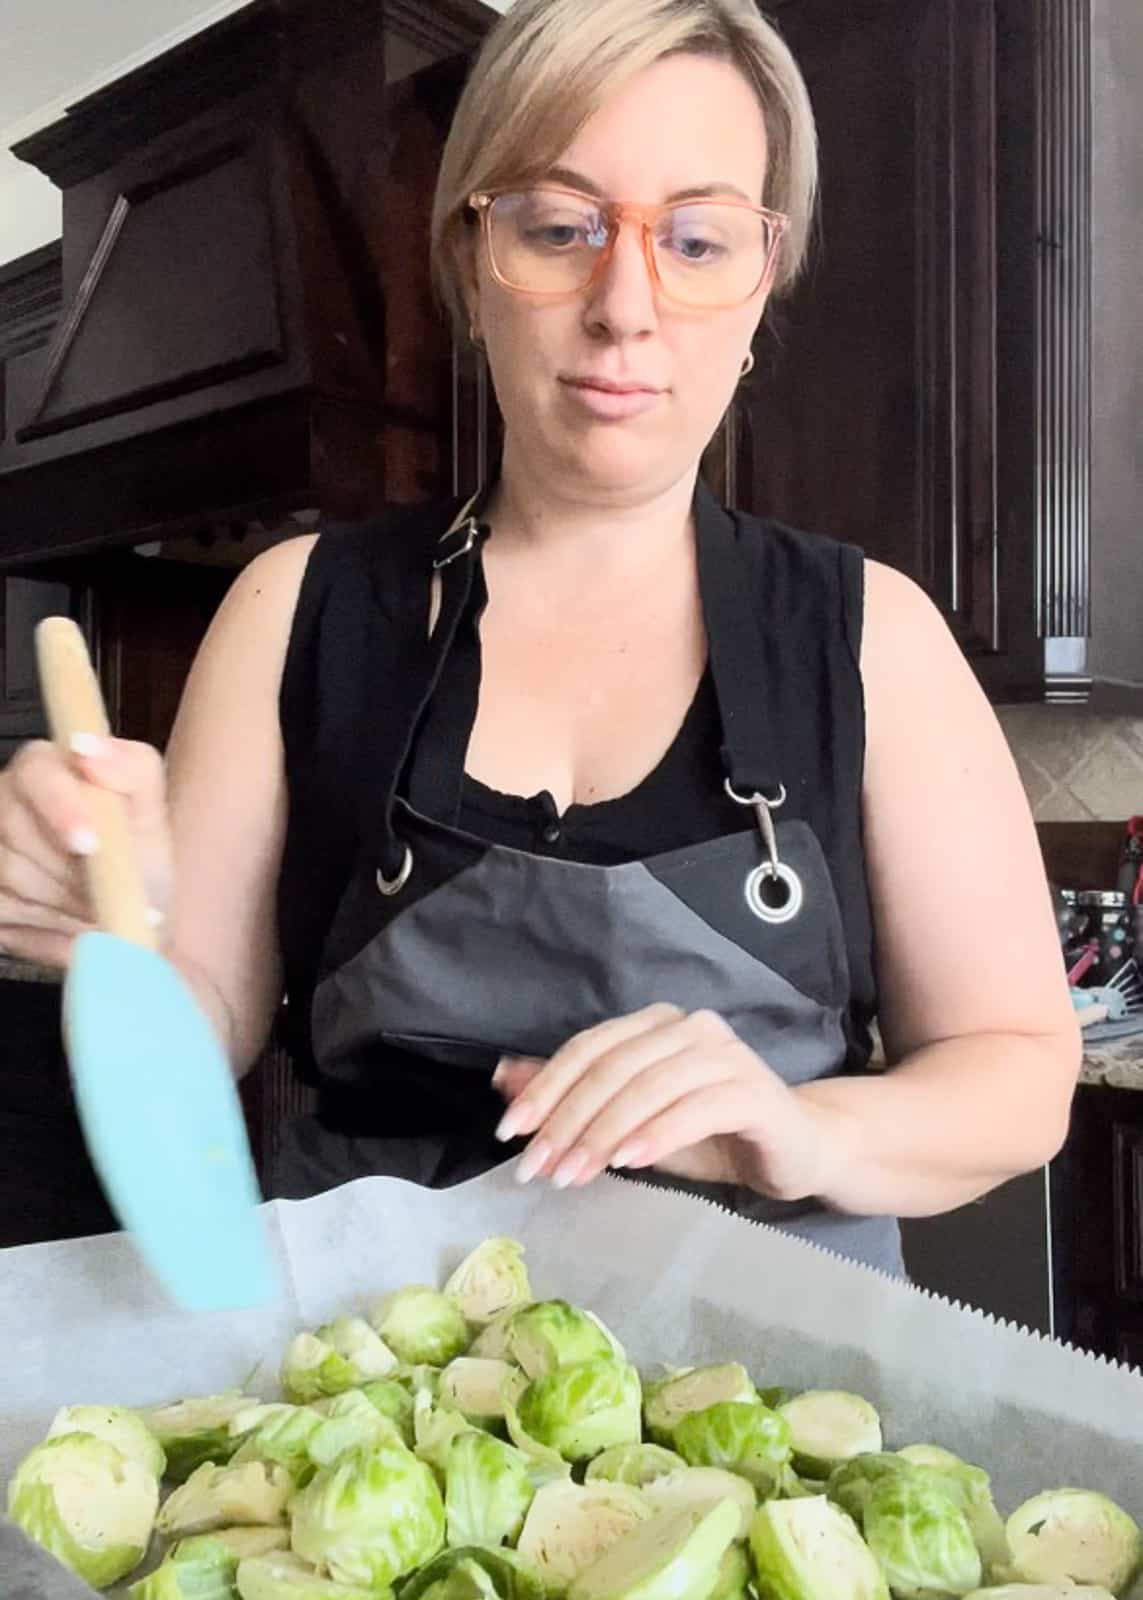 Jenna Passaro food blogger demonstrating How to cook oven roasted Brussels sprouts